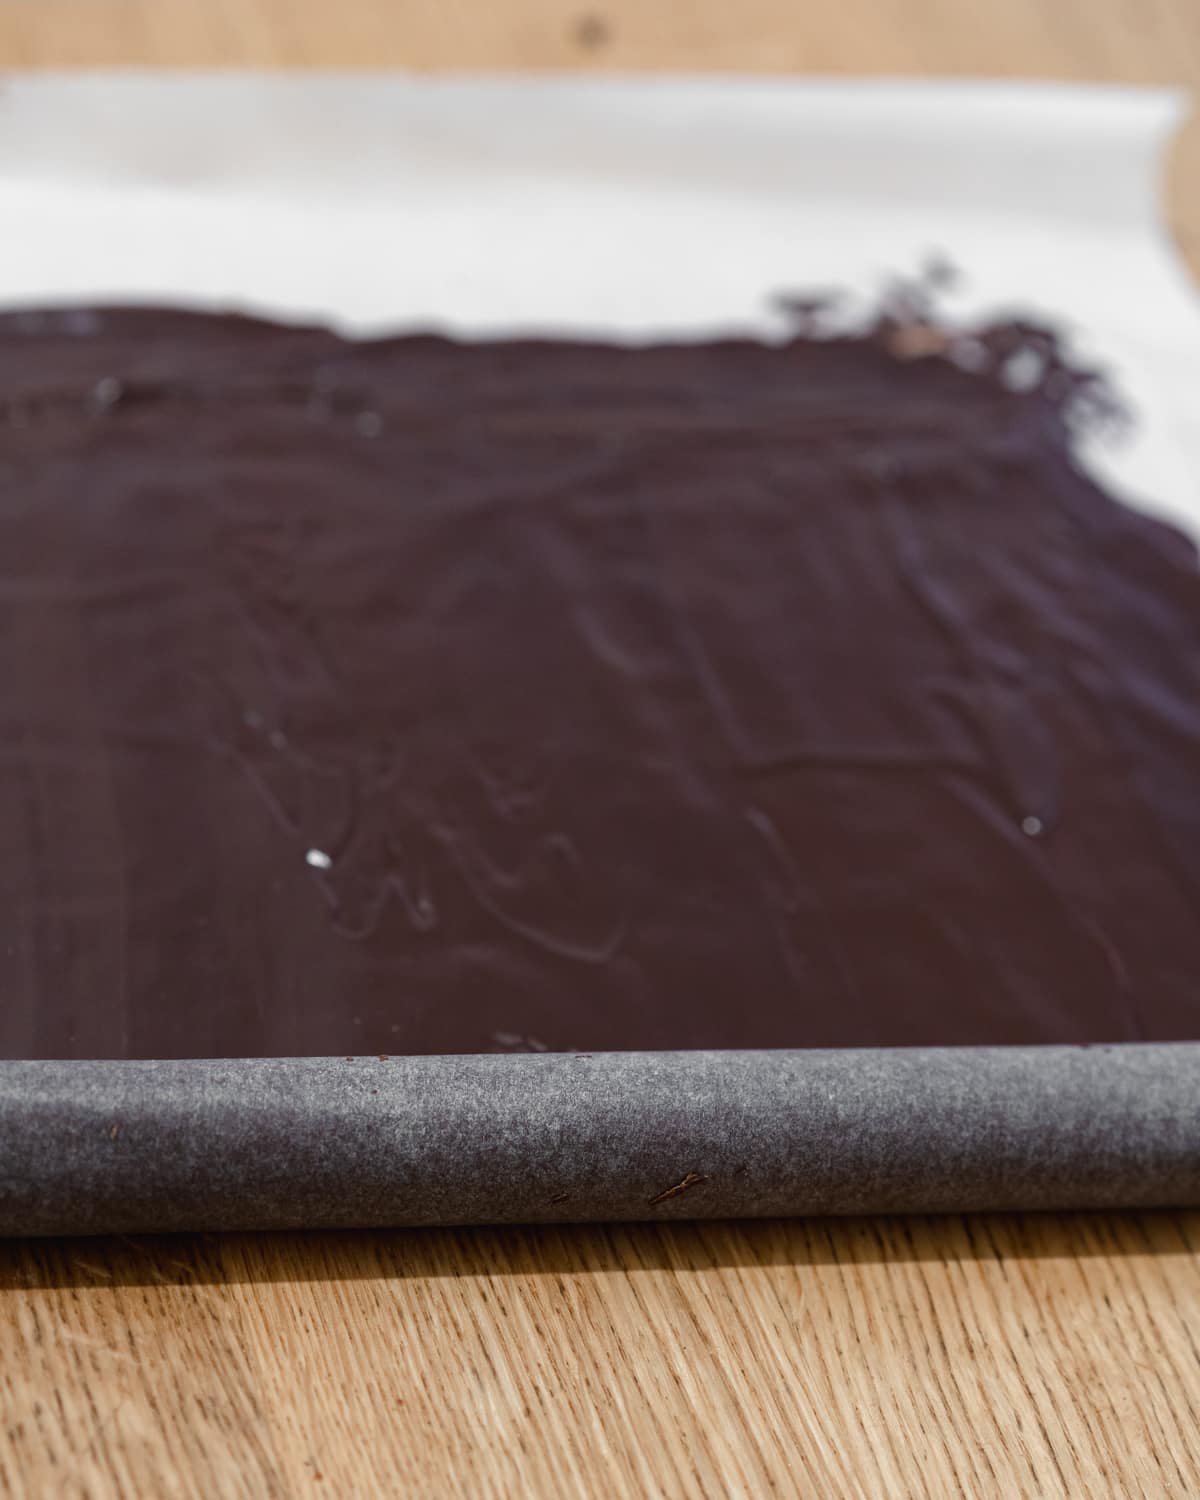 rolling up melted chocolate in parchment to make chocolate bark.